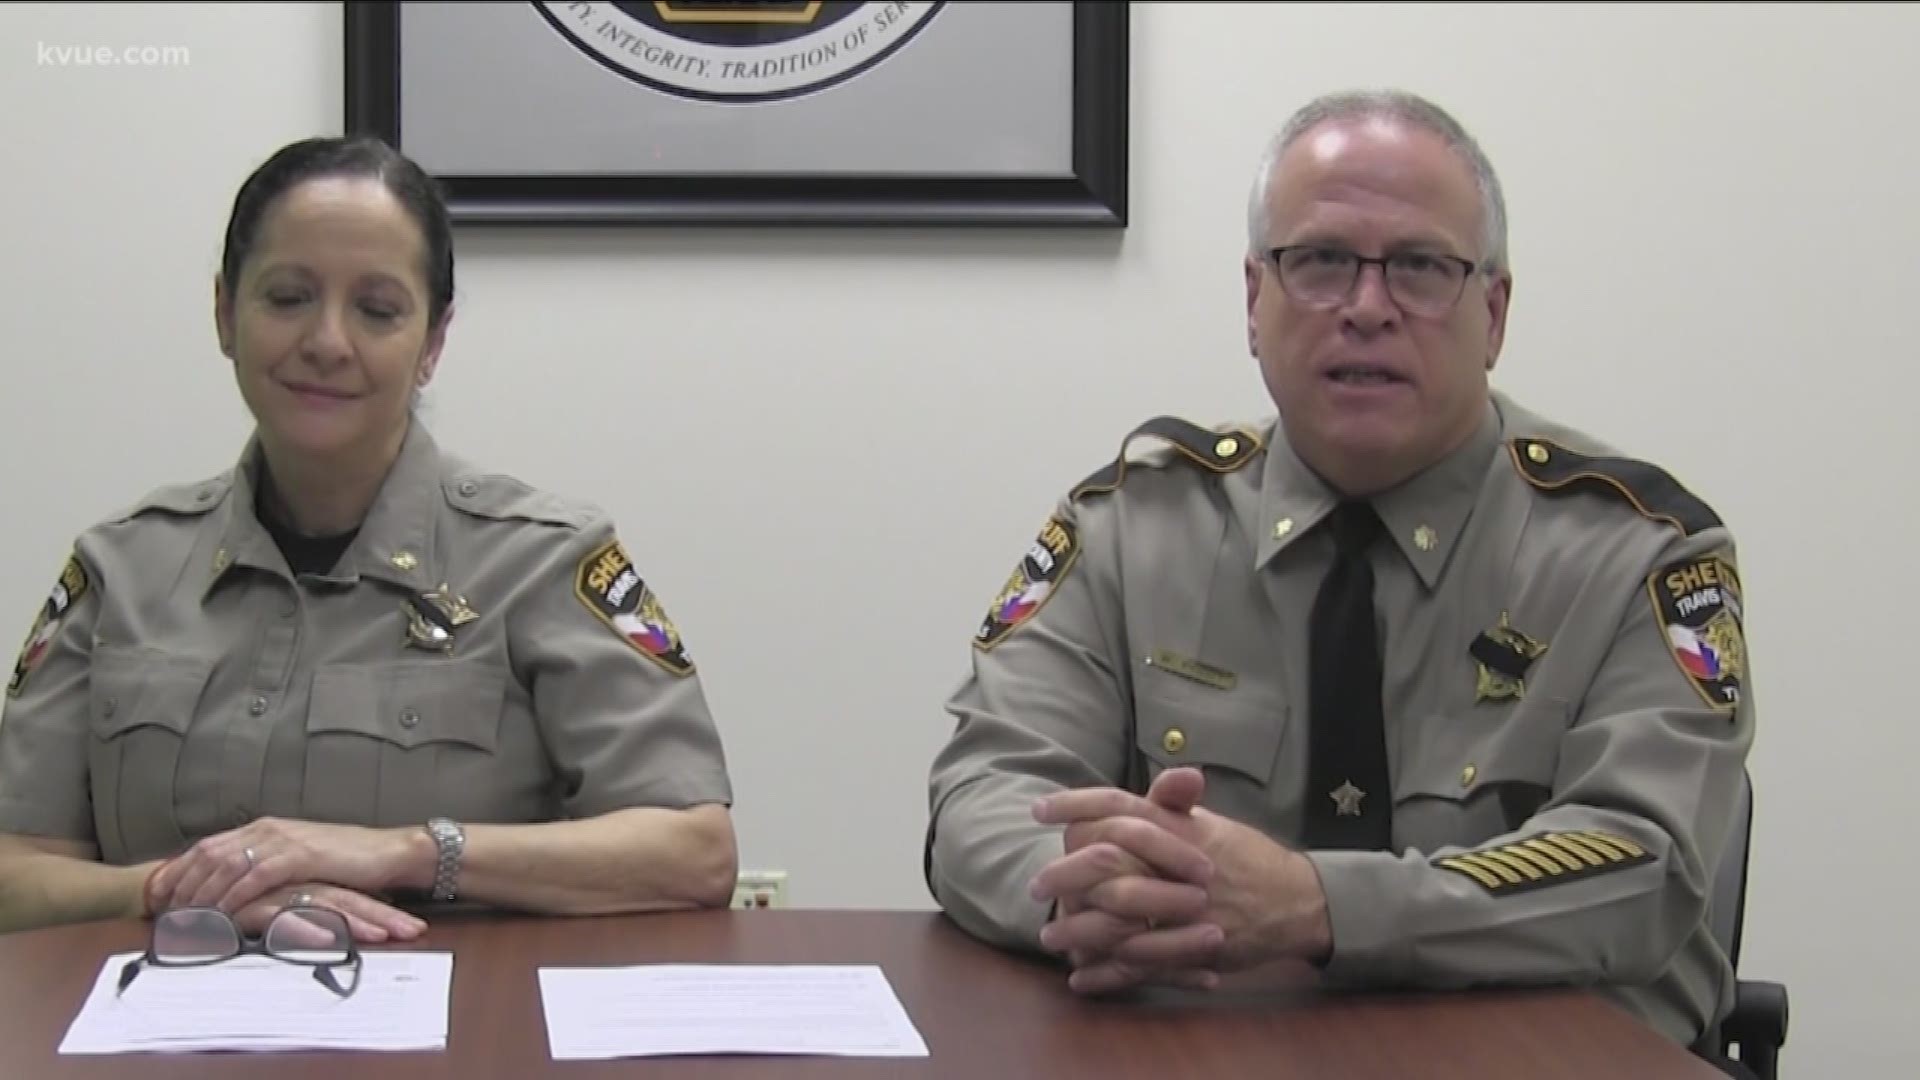 The coronavirus pandemic is affecting how sheriff's offices operate.